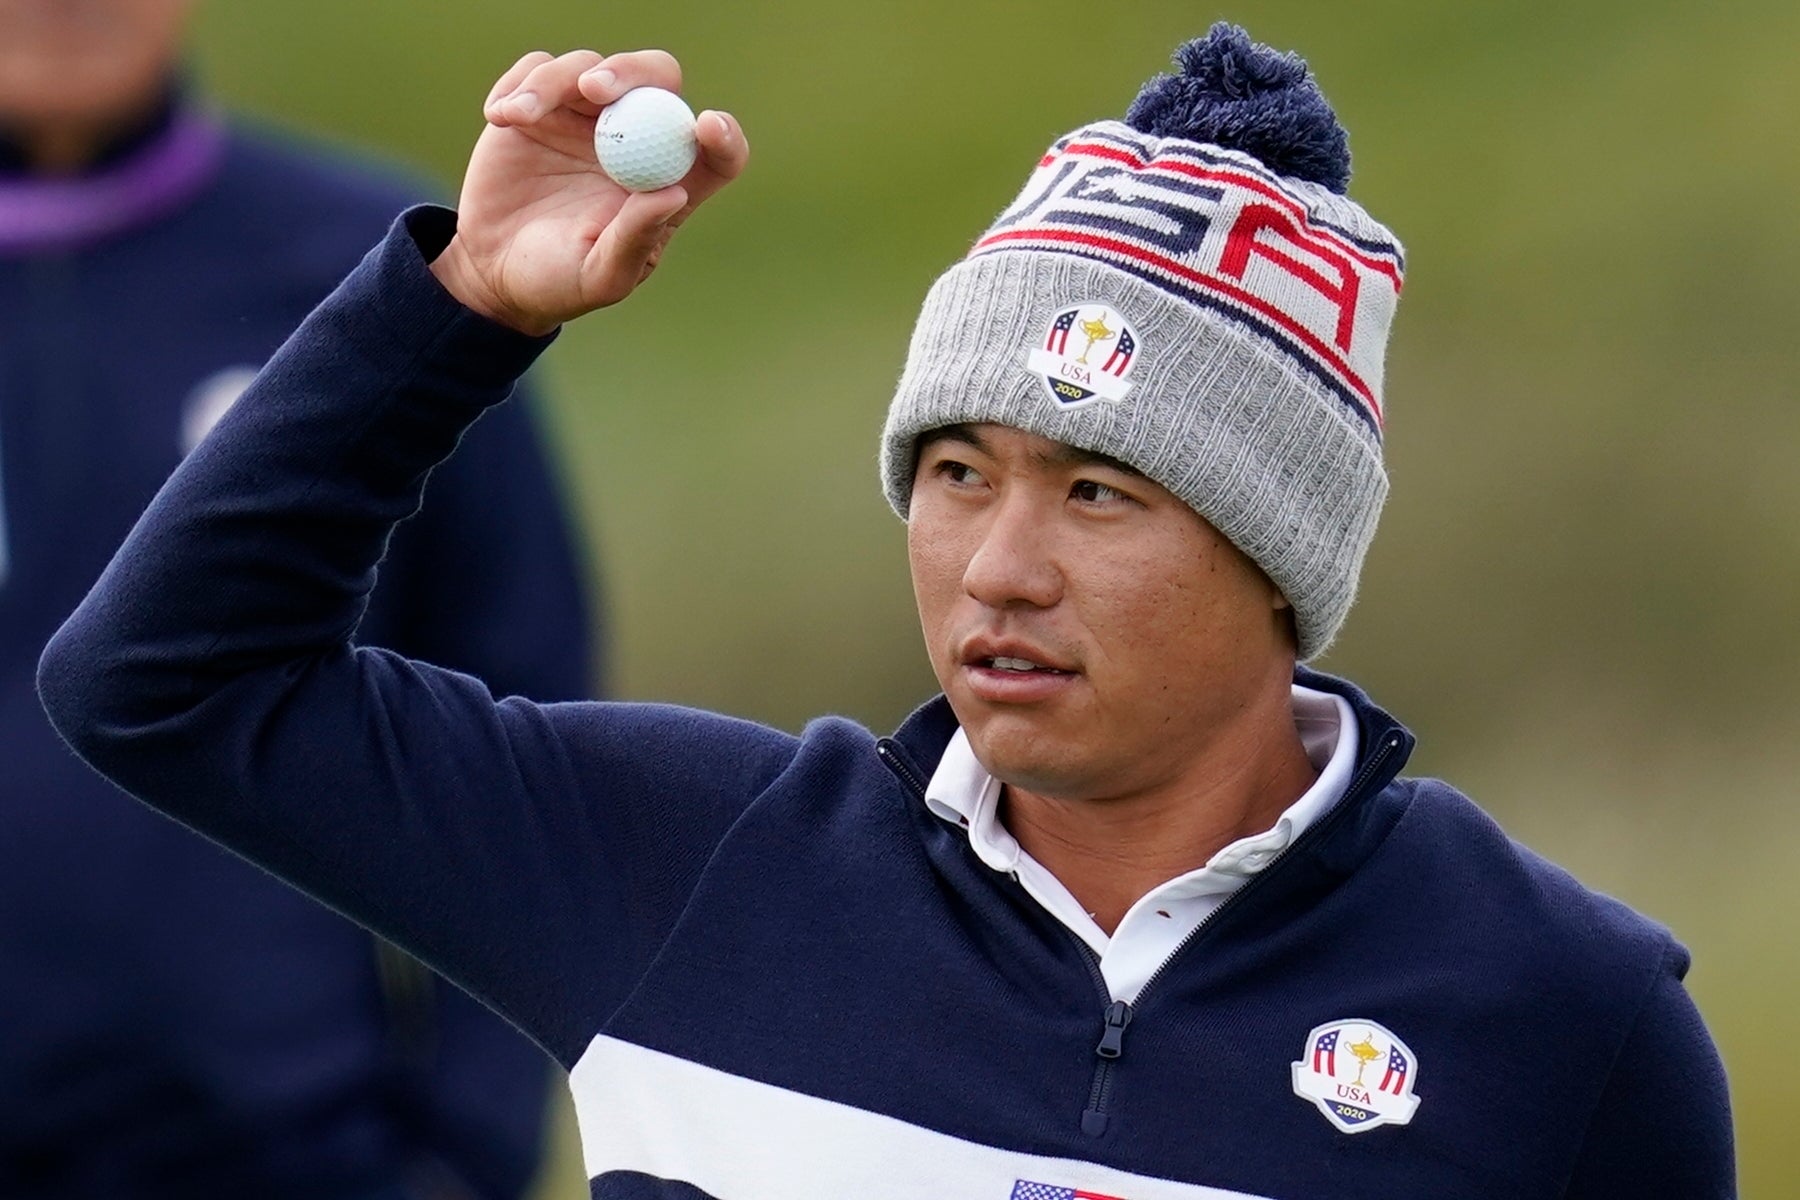 Collin Morikawa reacts on the 10th hole during a practice day at the 43rd Ryder Cup at Whistling Straits (Ashley Landis/AP)